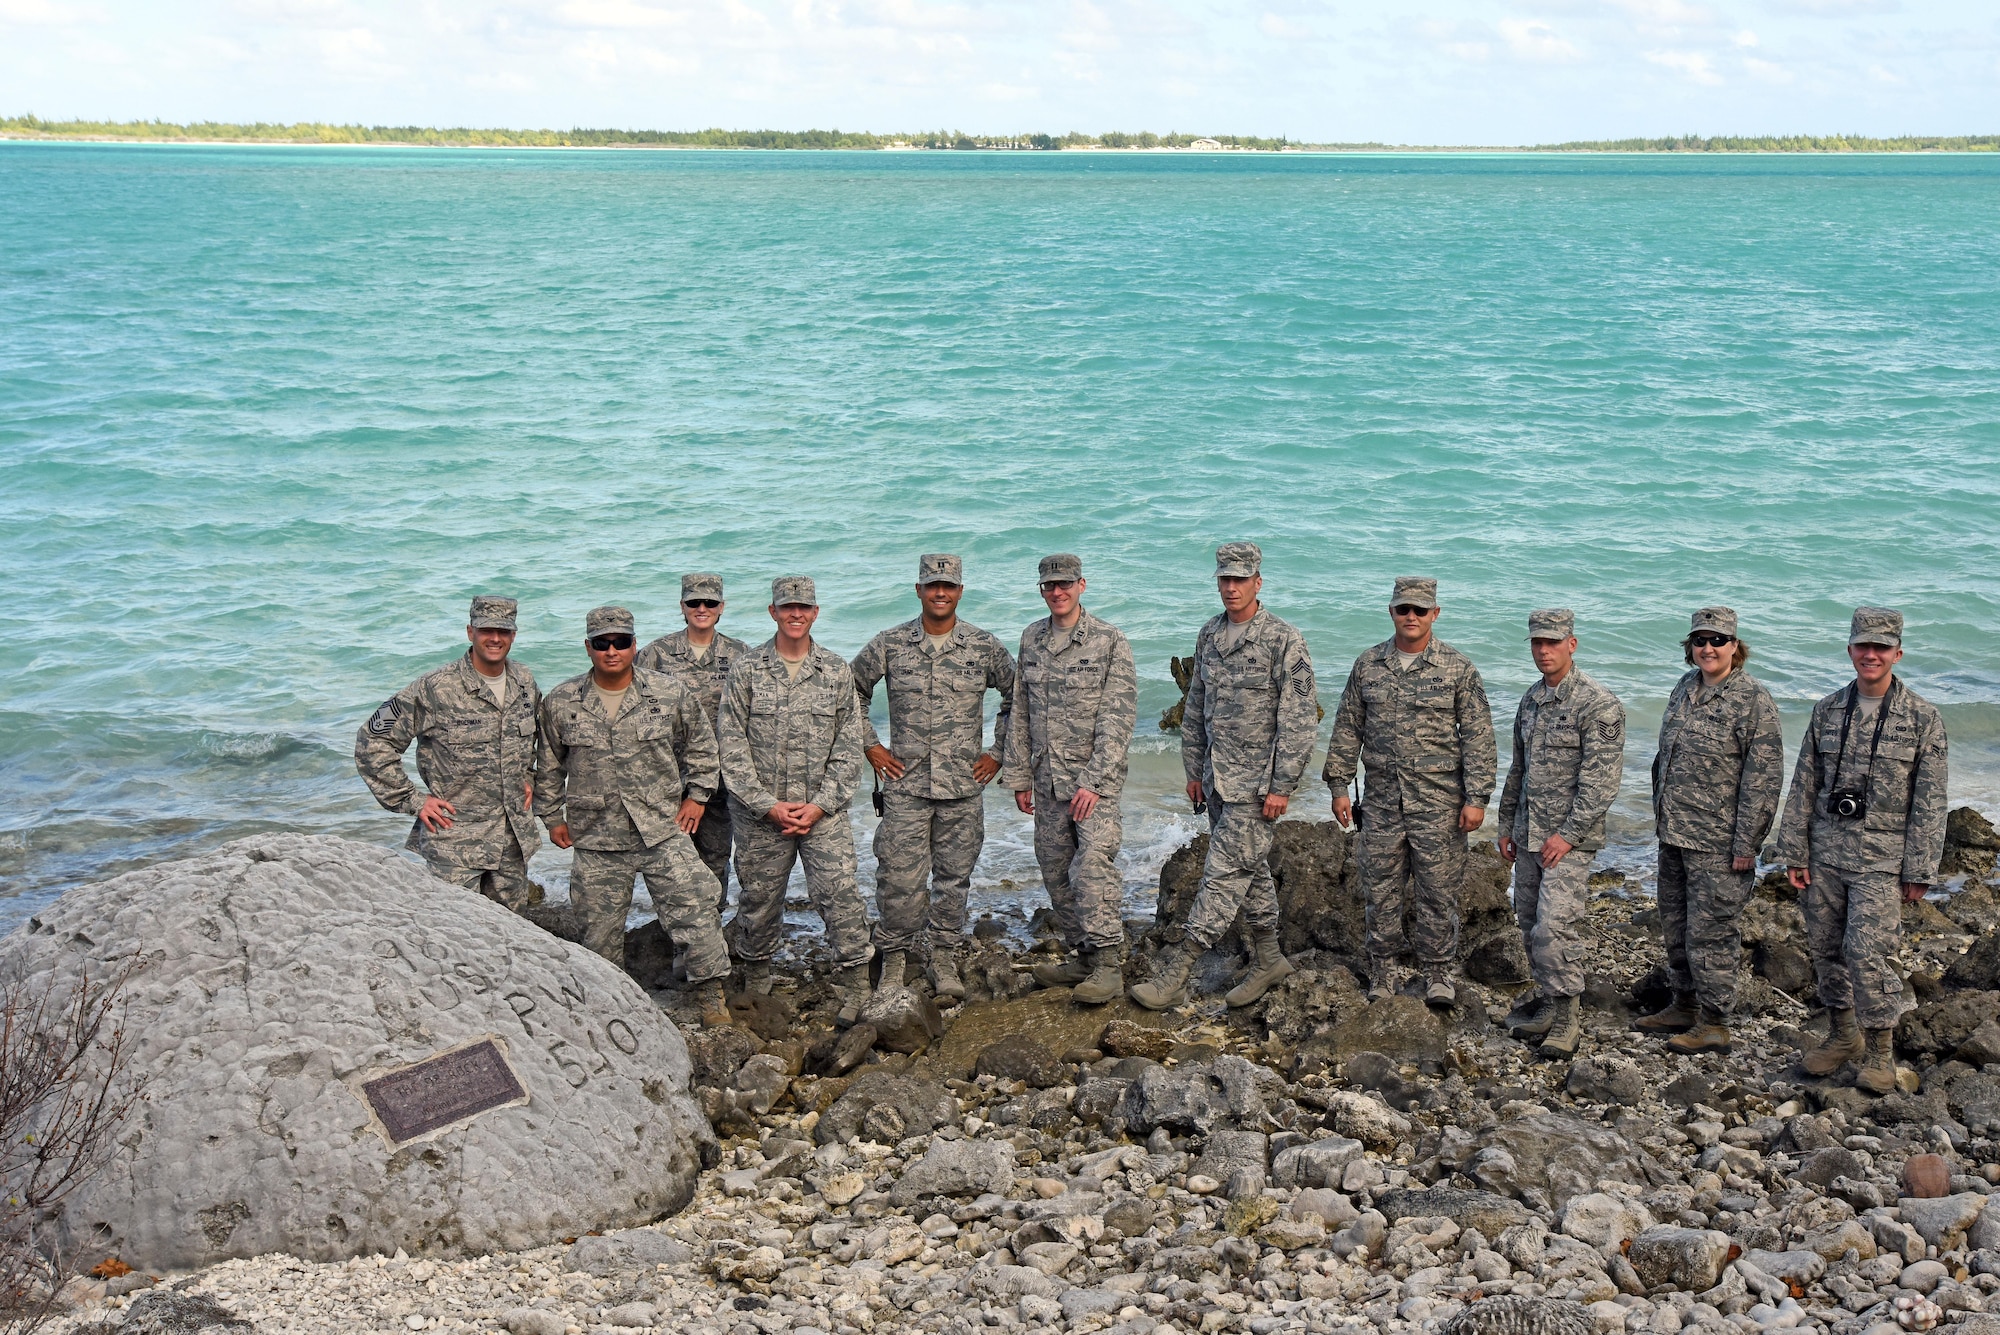 WAKE ISLAND ATOLL--Guests who attended the Battle of Wake Island 75th anniversary ceremony including leadership from Pacific Air Forces Regional Support Center and 11th Air Force pay their respects and pose for a group photo at the "98 Rock Memorial." It is said that one of the 98 civilian prisoners of war etched a message into the rock; "98 U.S. P.W. 5-10-43." The 98 civilians were executed Oct. 7, 1943 by Japanese forces who controlled the island after the Battle for Wake Island in December 1941. (U.S. Air Force photo/Tech. Sgt. John Gordinier)